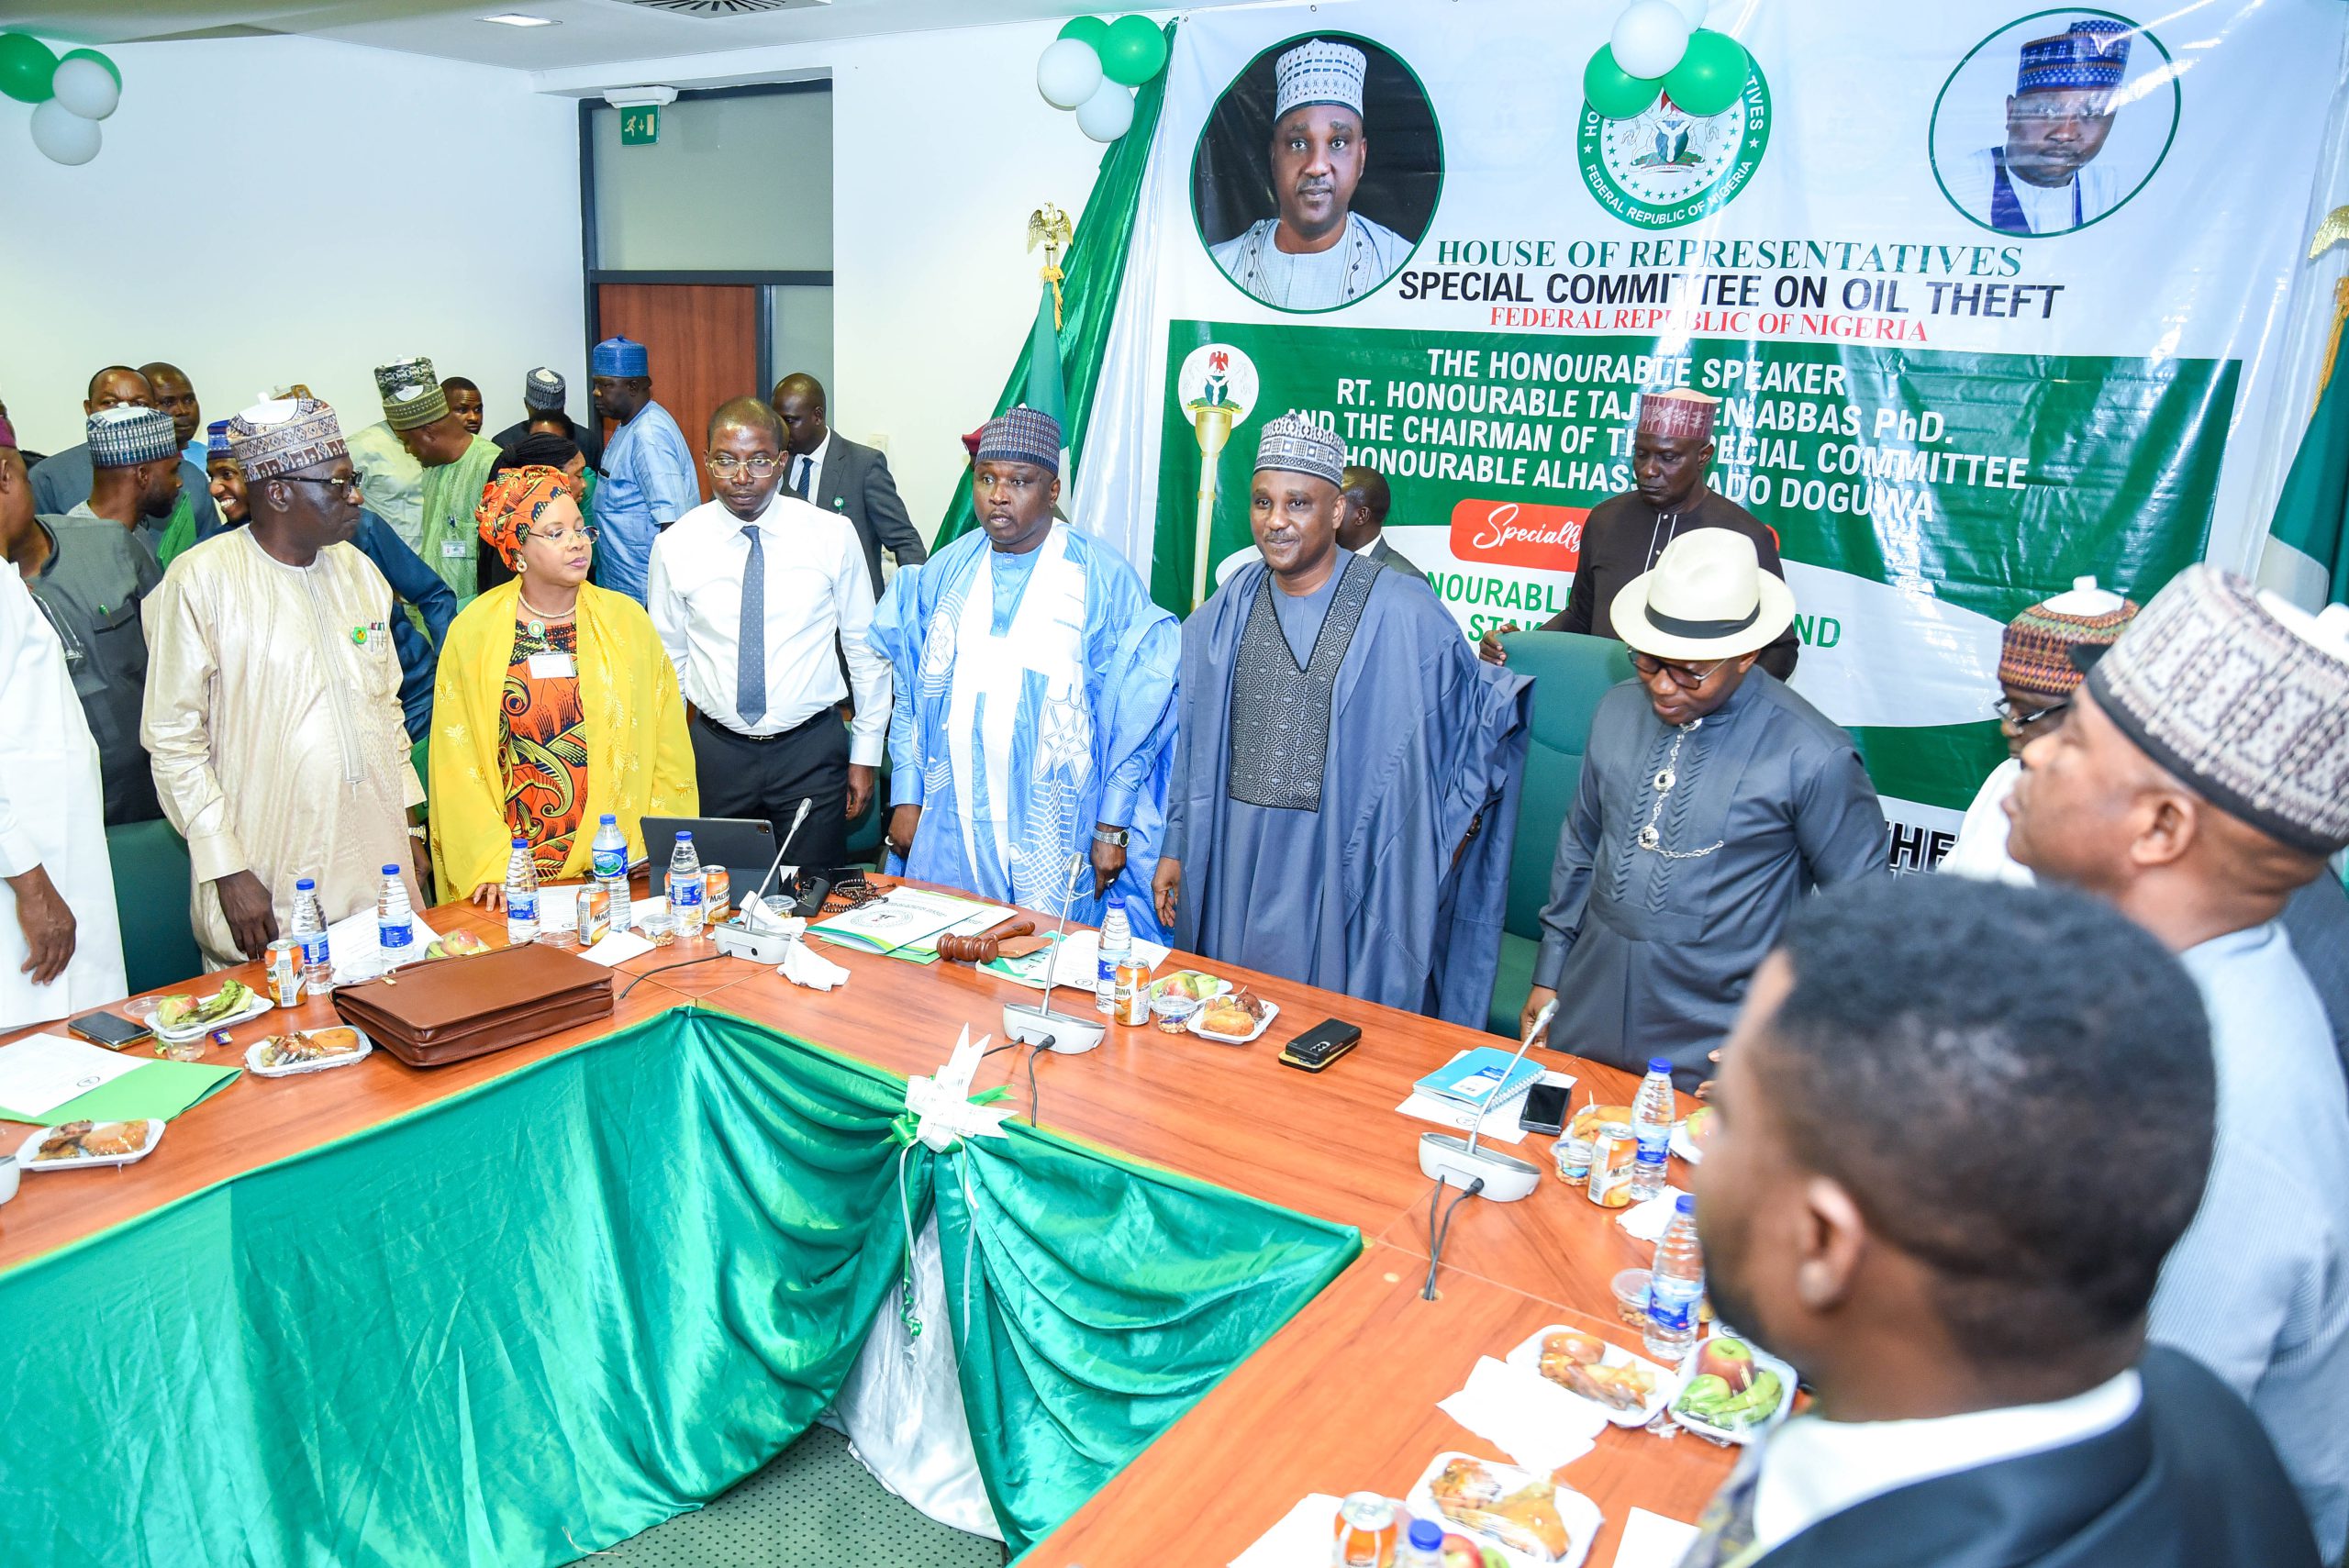 nauguration of the Special Committee on Oil Theft at the National Assembly